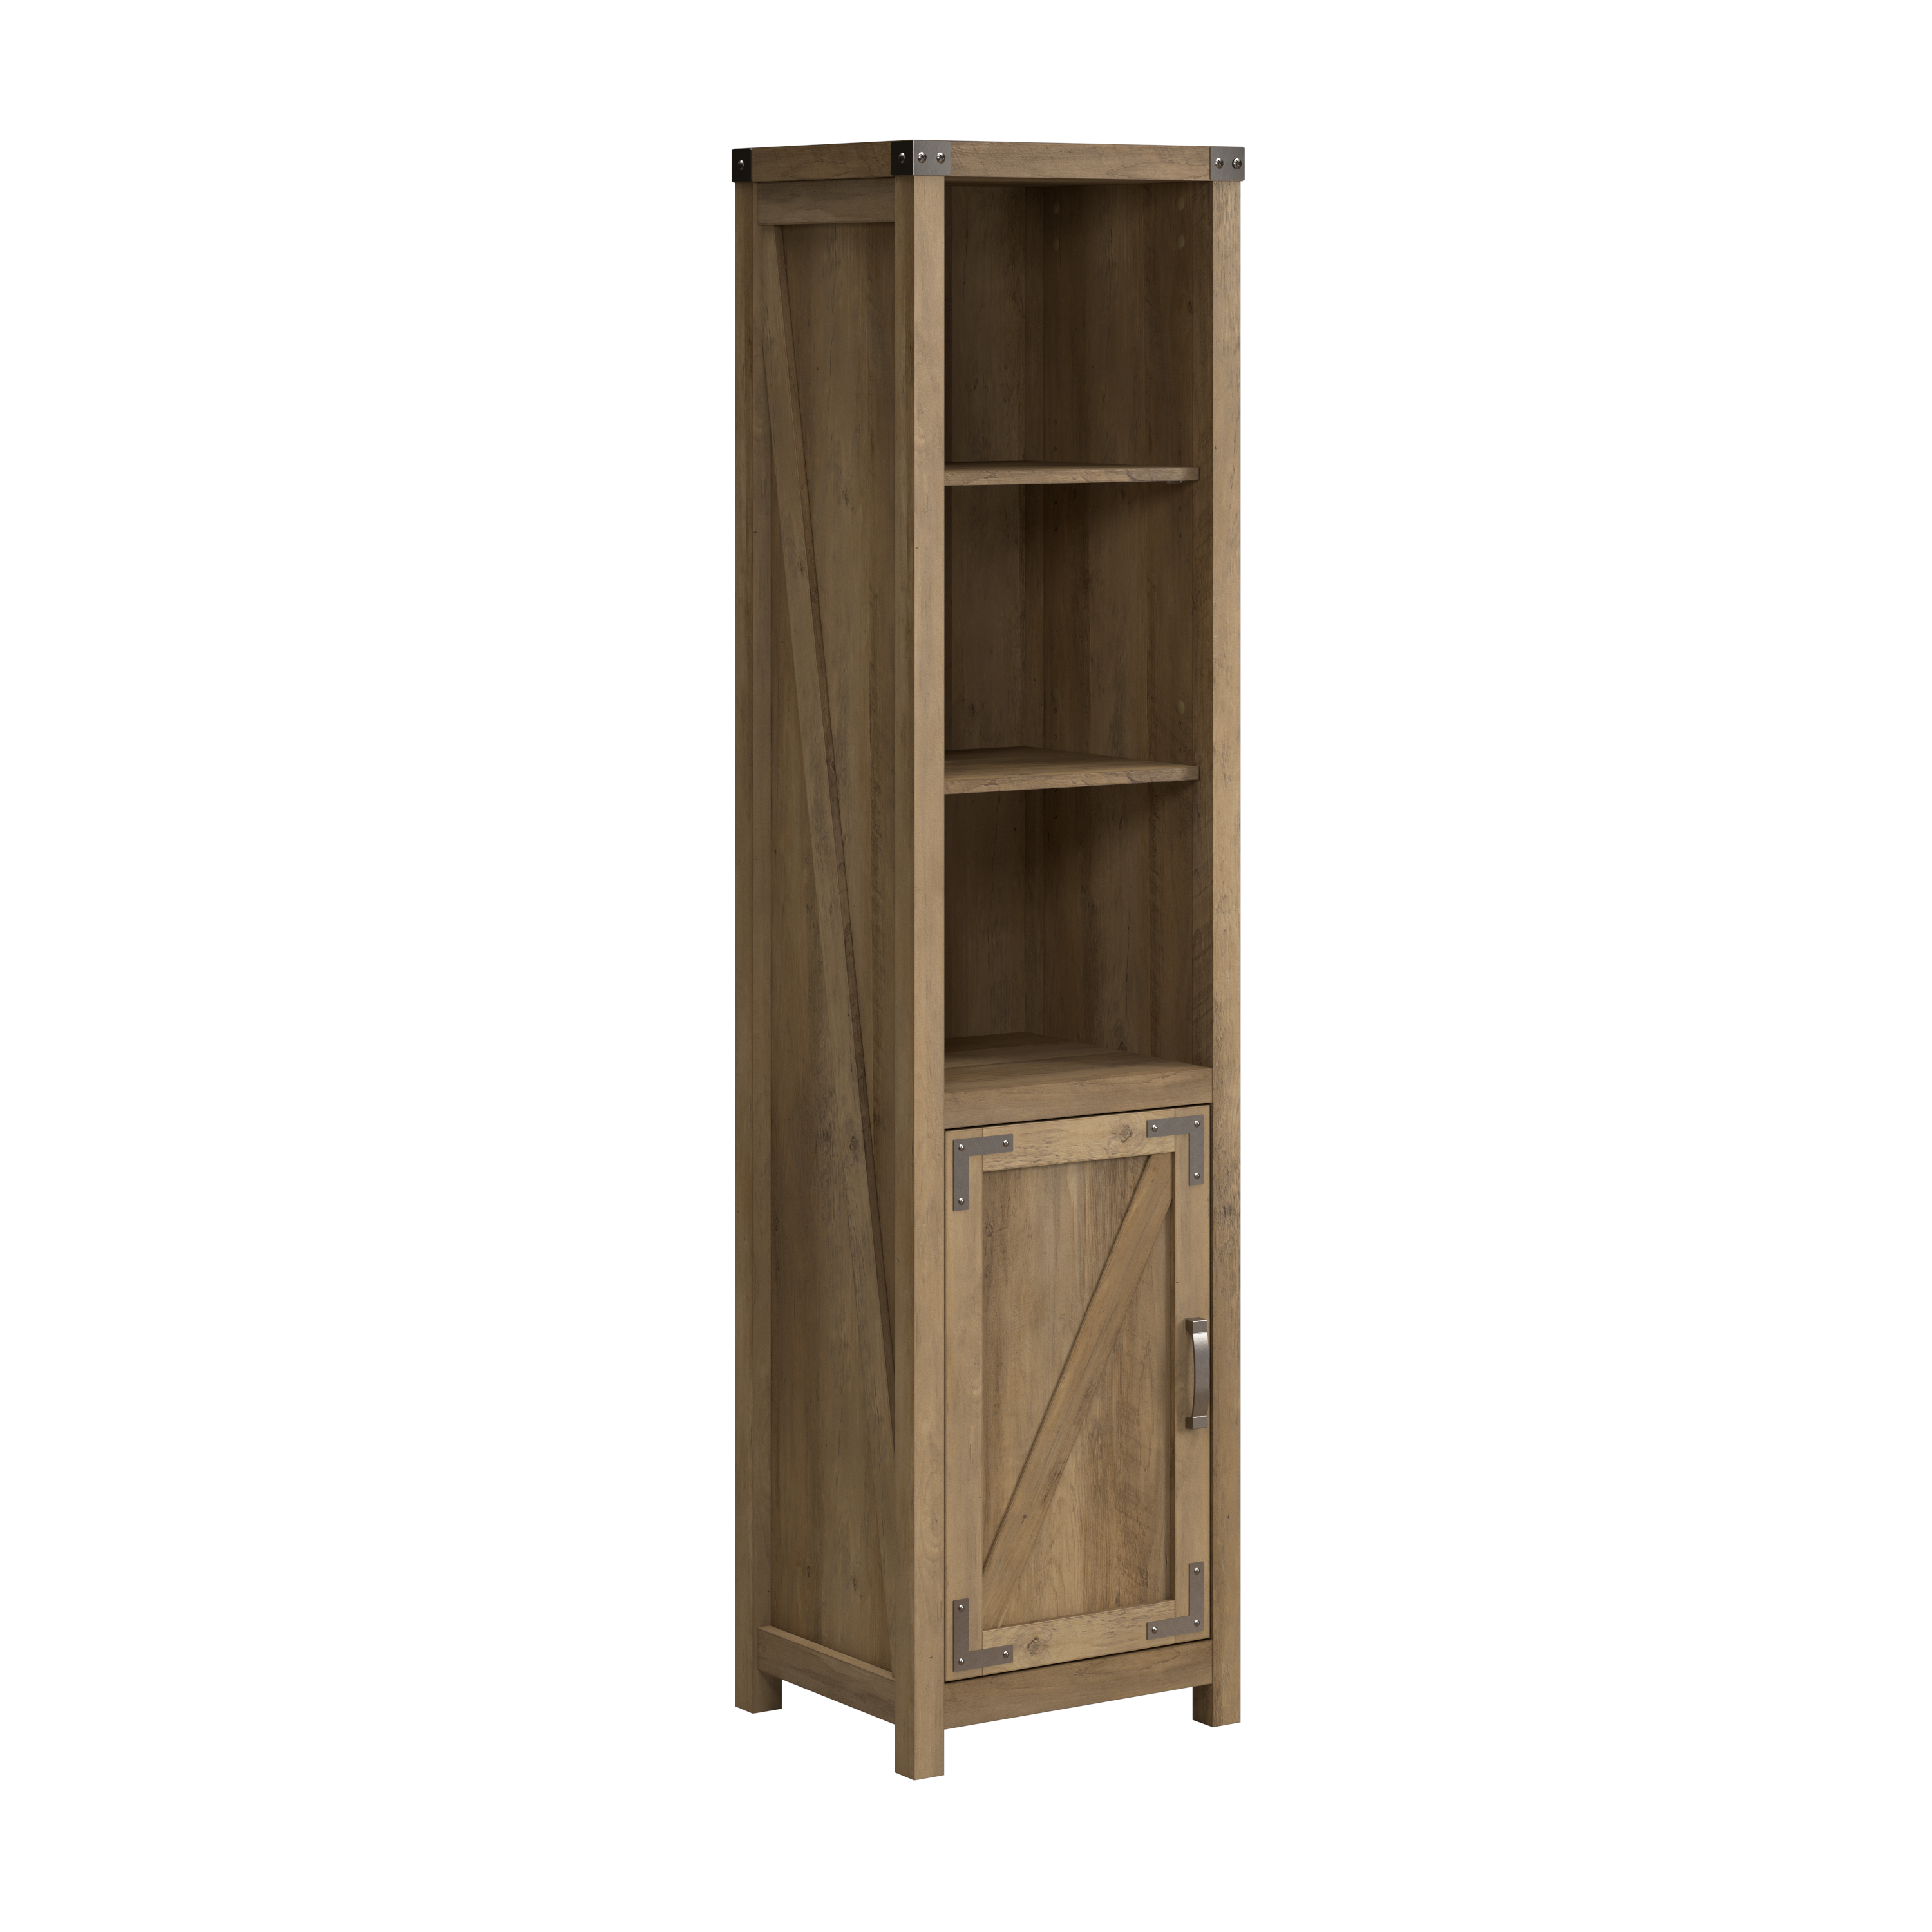 Shop Bush Furniture Knoxville Tall Narrow 5 Shelf Bookcase with Door 02 CGB118RCP-03 #color_reclaimed pine